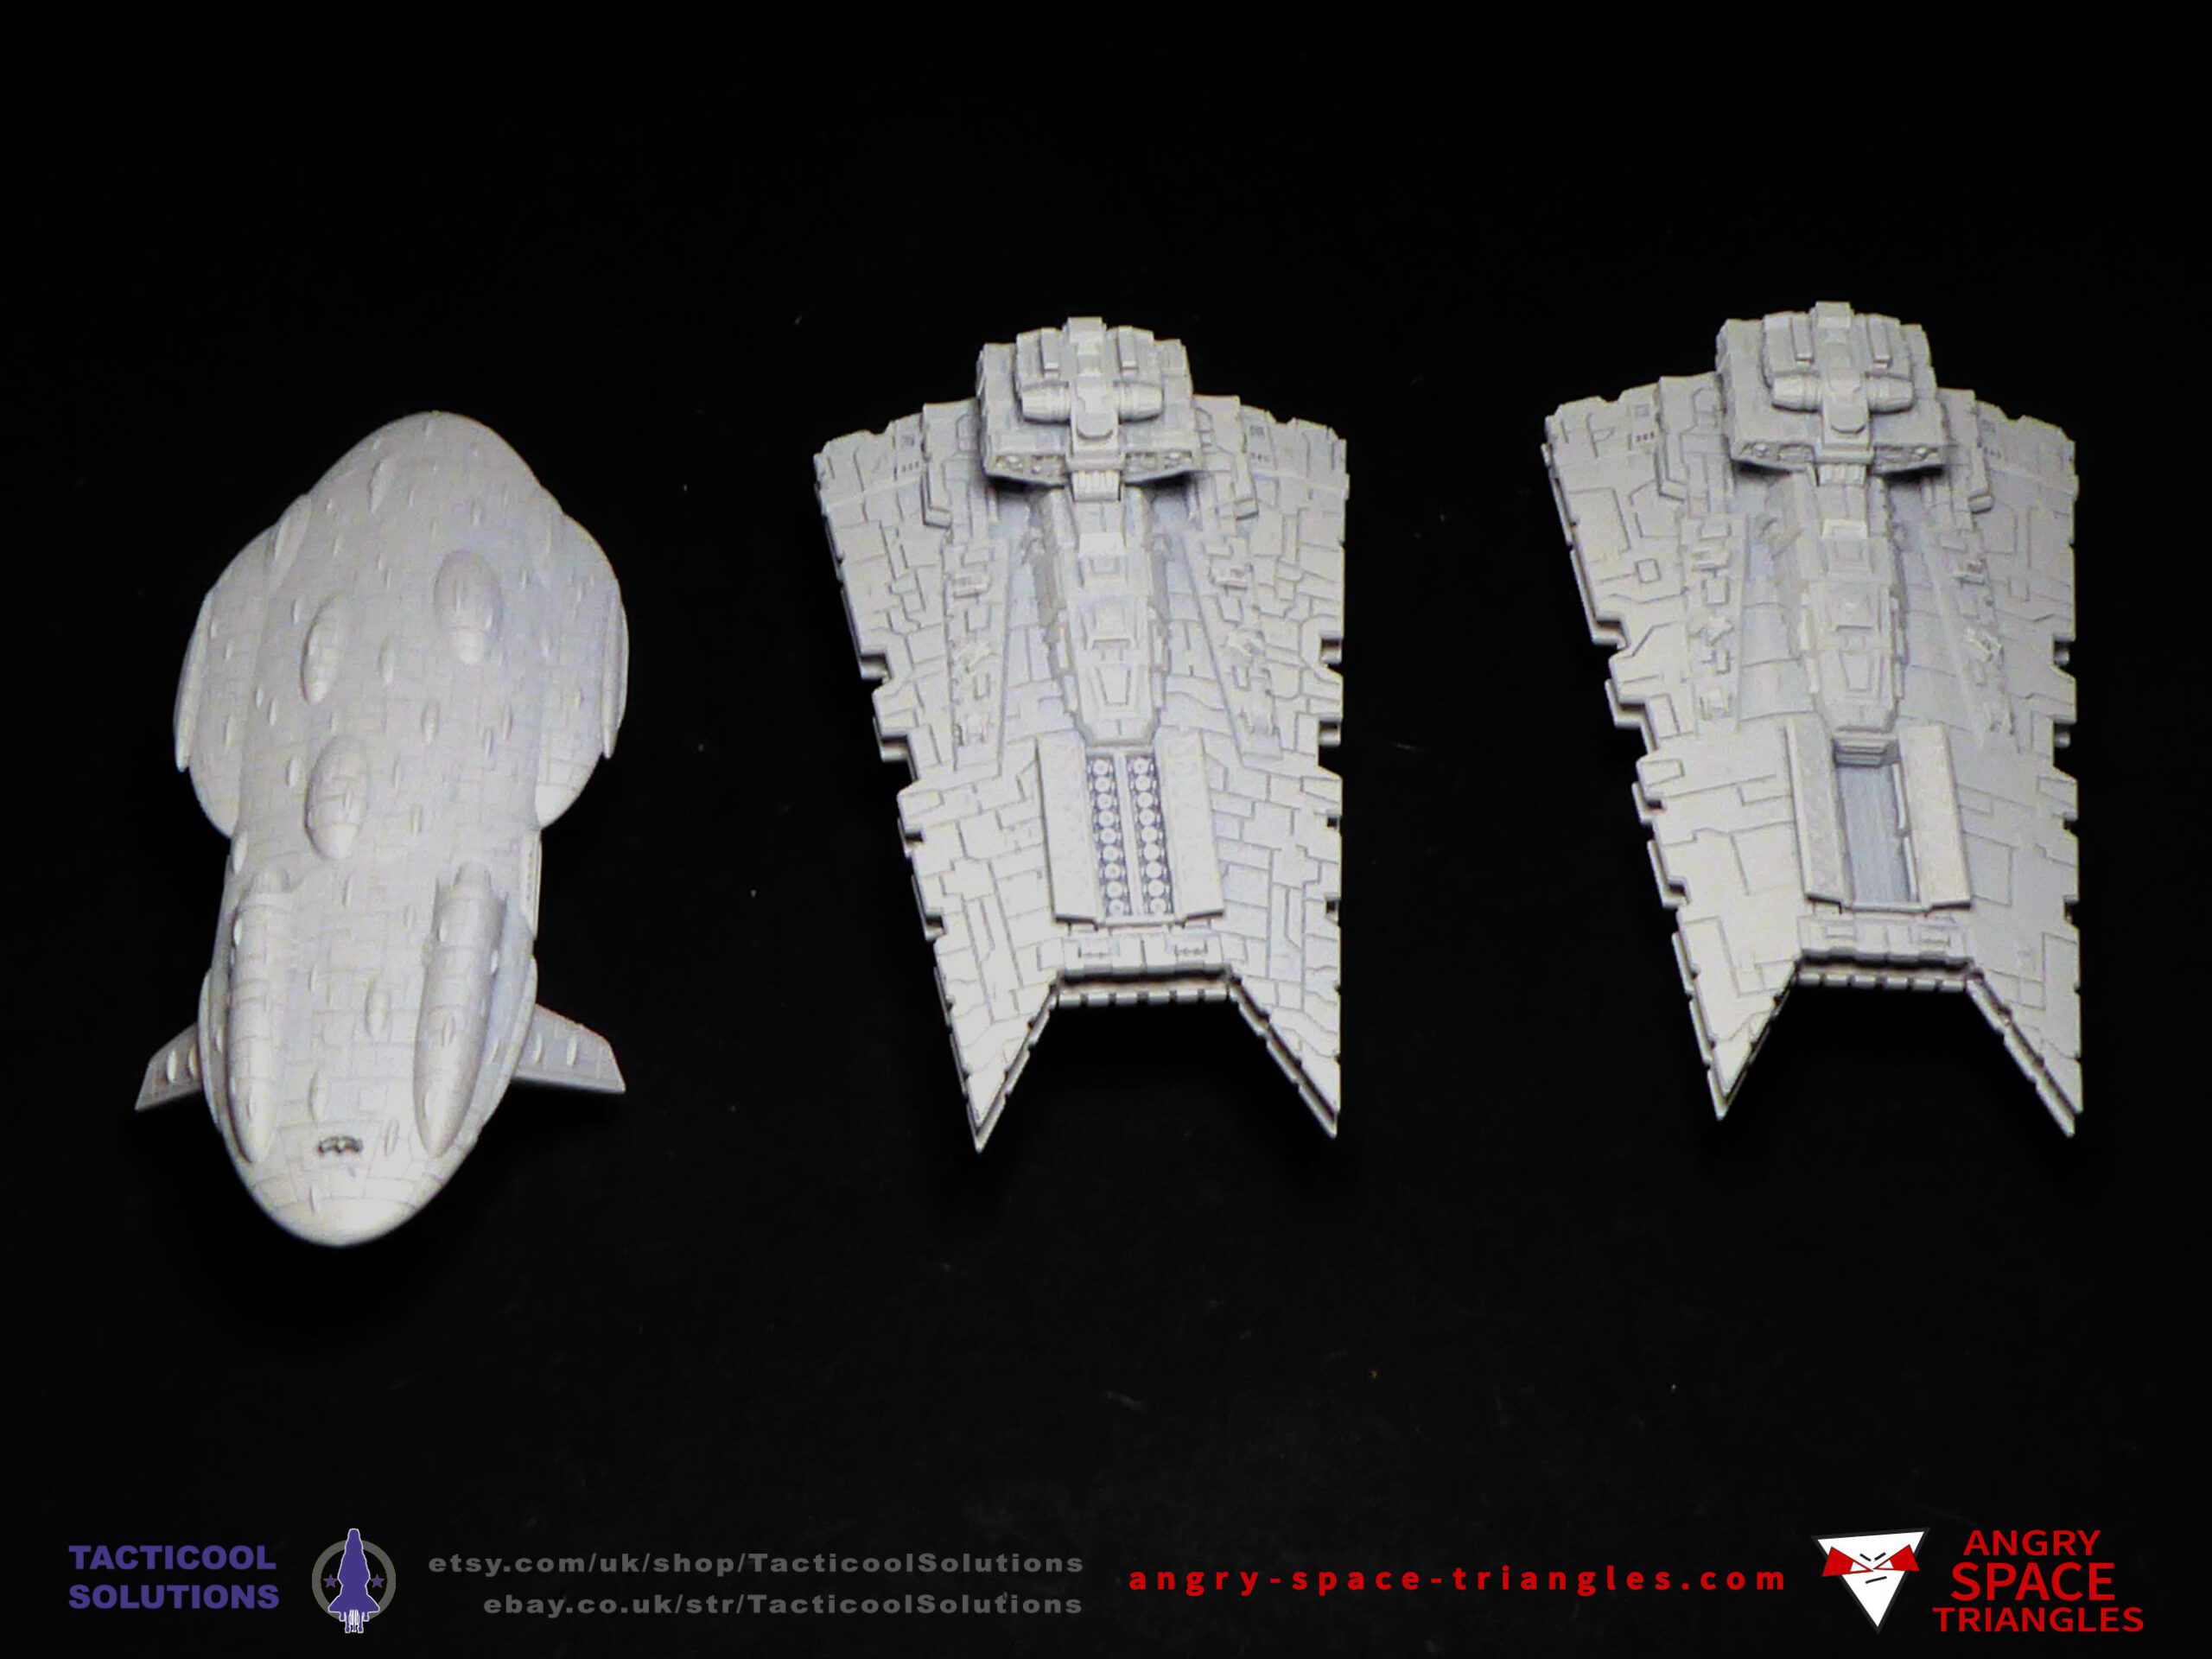 3 3d printed ships from Tacticool Solutions - Star Wars Armada